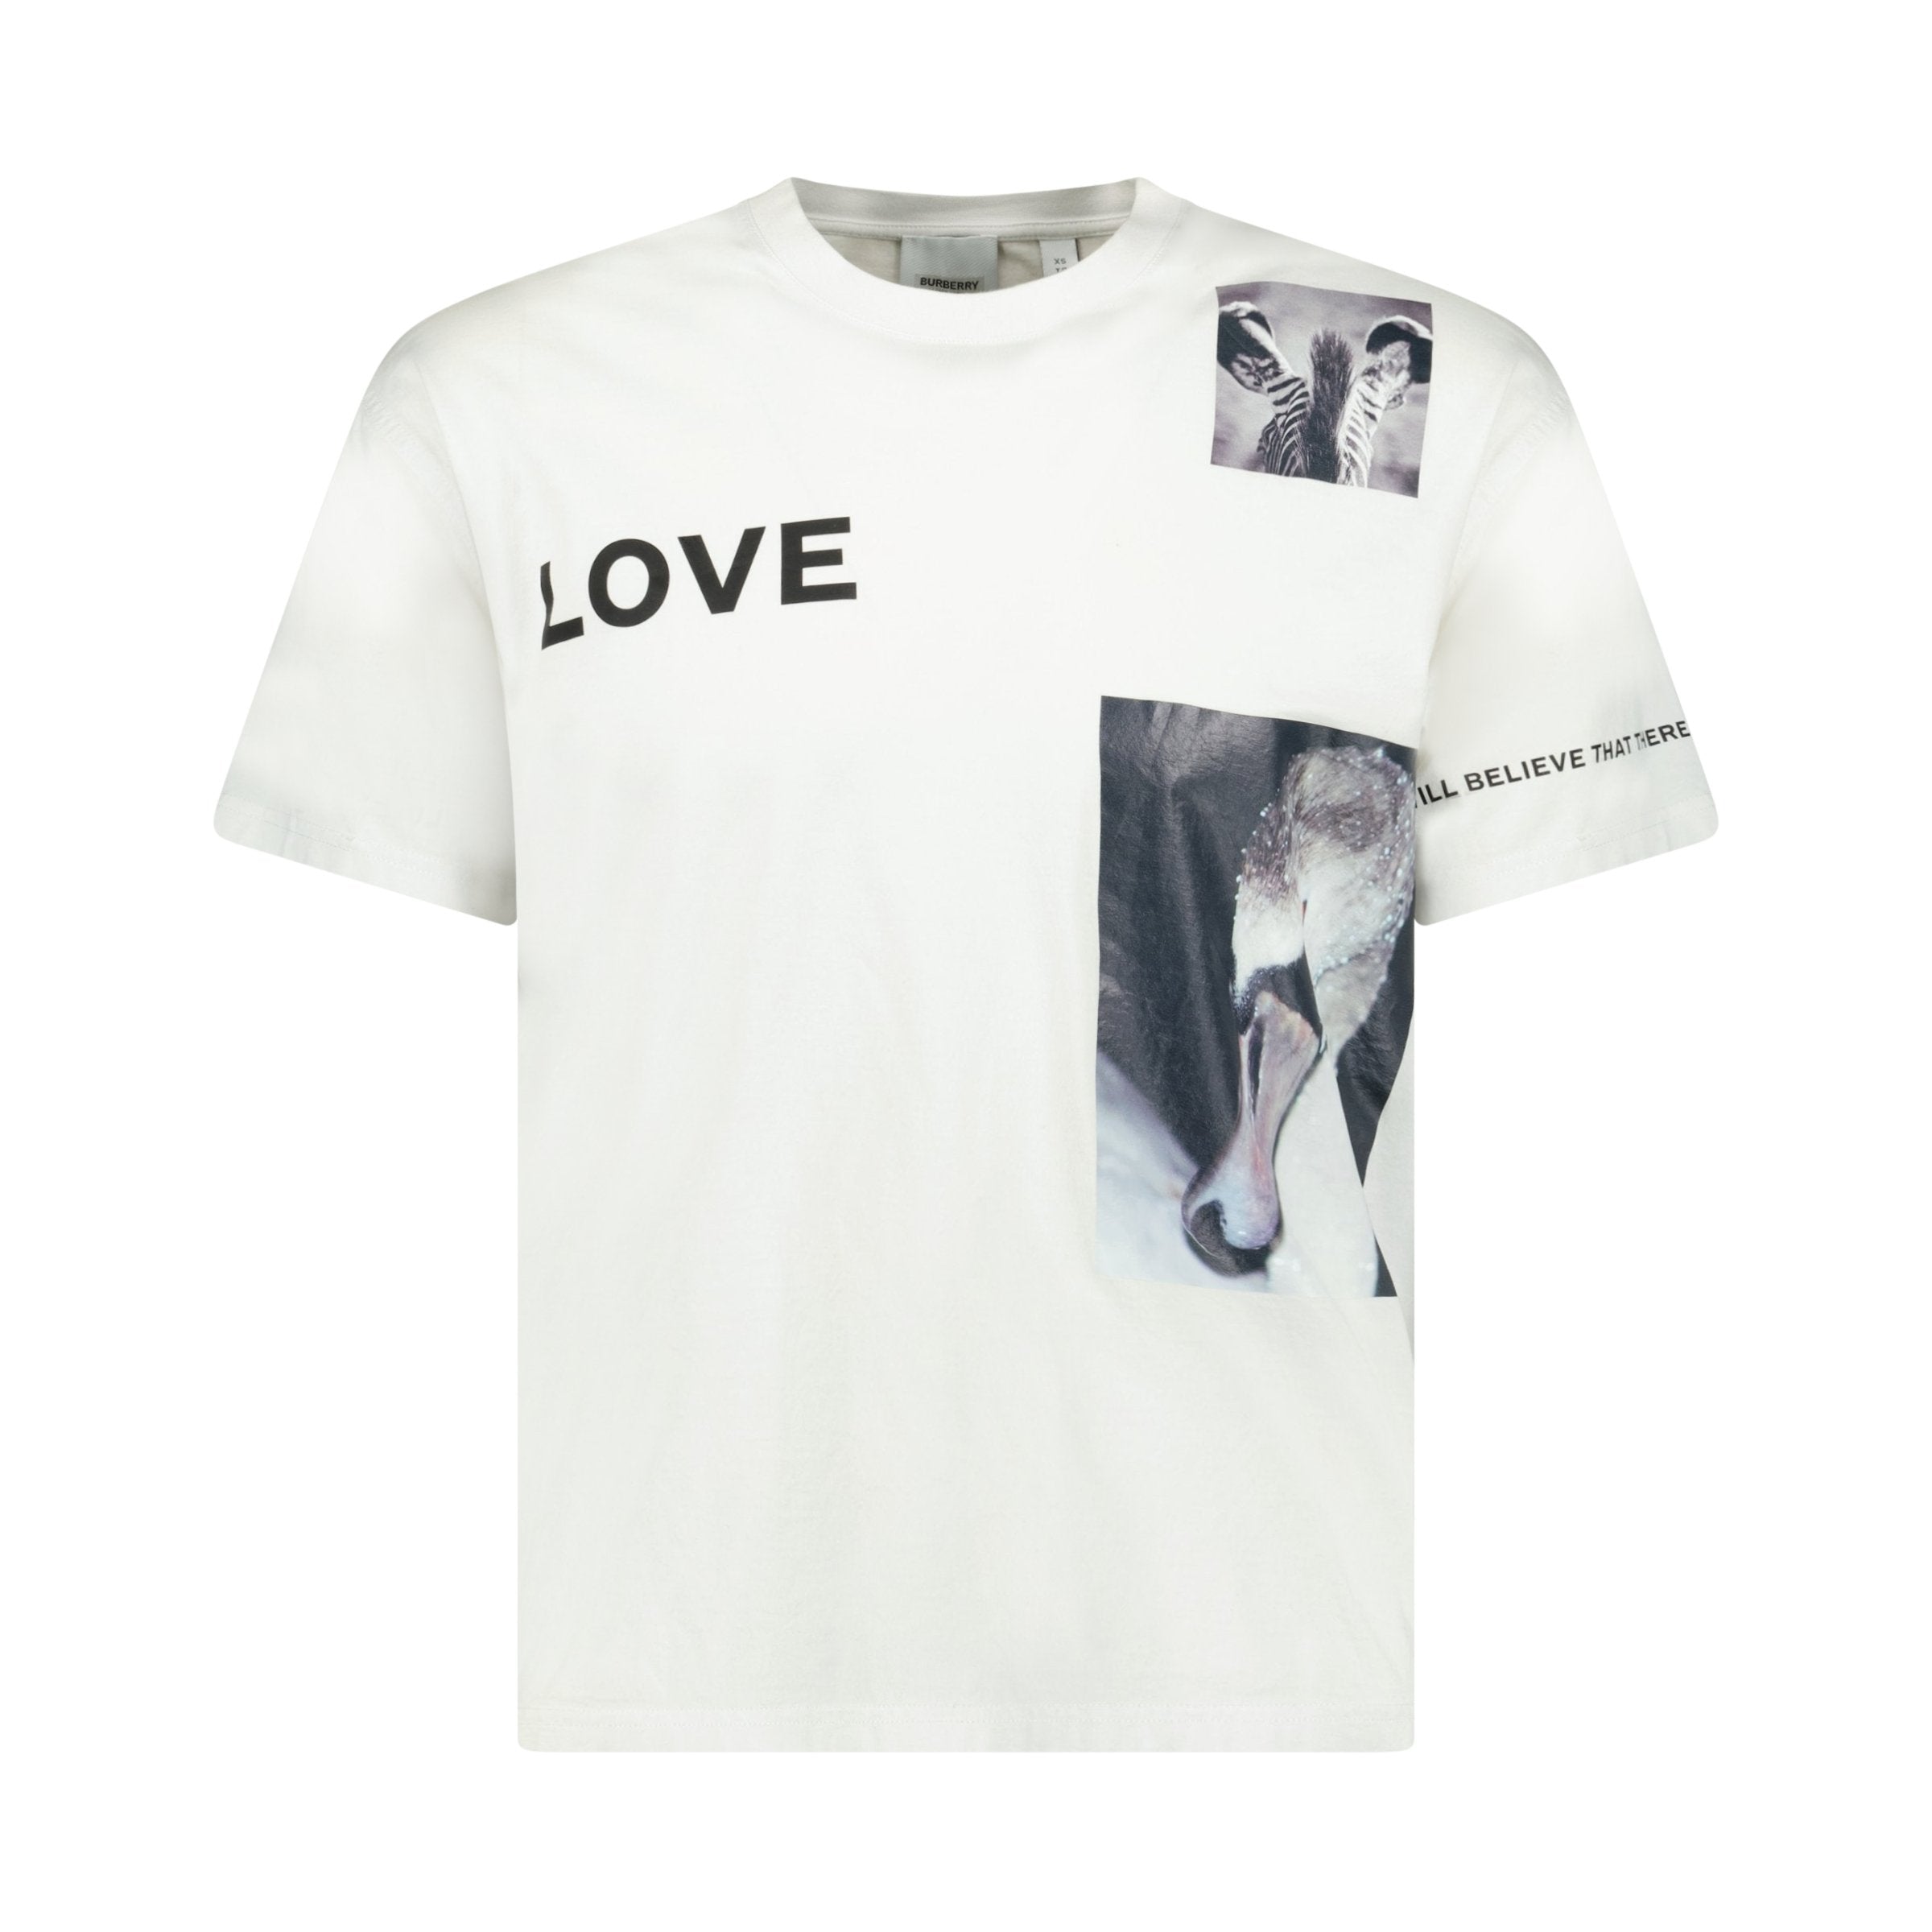 BURBERRY LOVE T SHIRT WHITE | affluentarchives - Used Designer Clothing  Outlet sale Under RRP